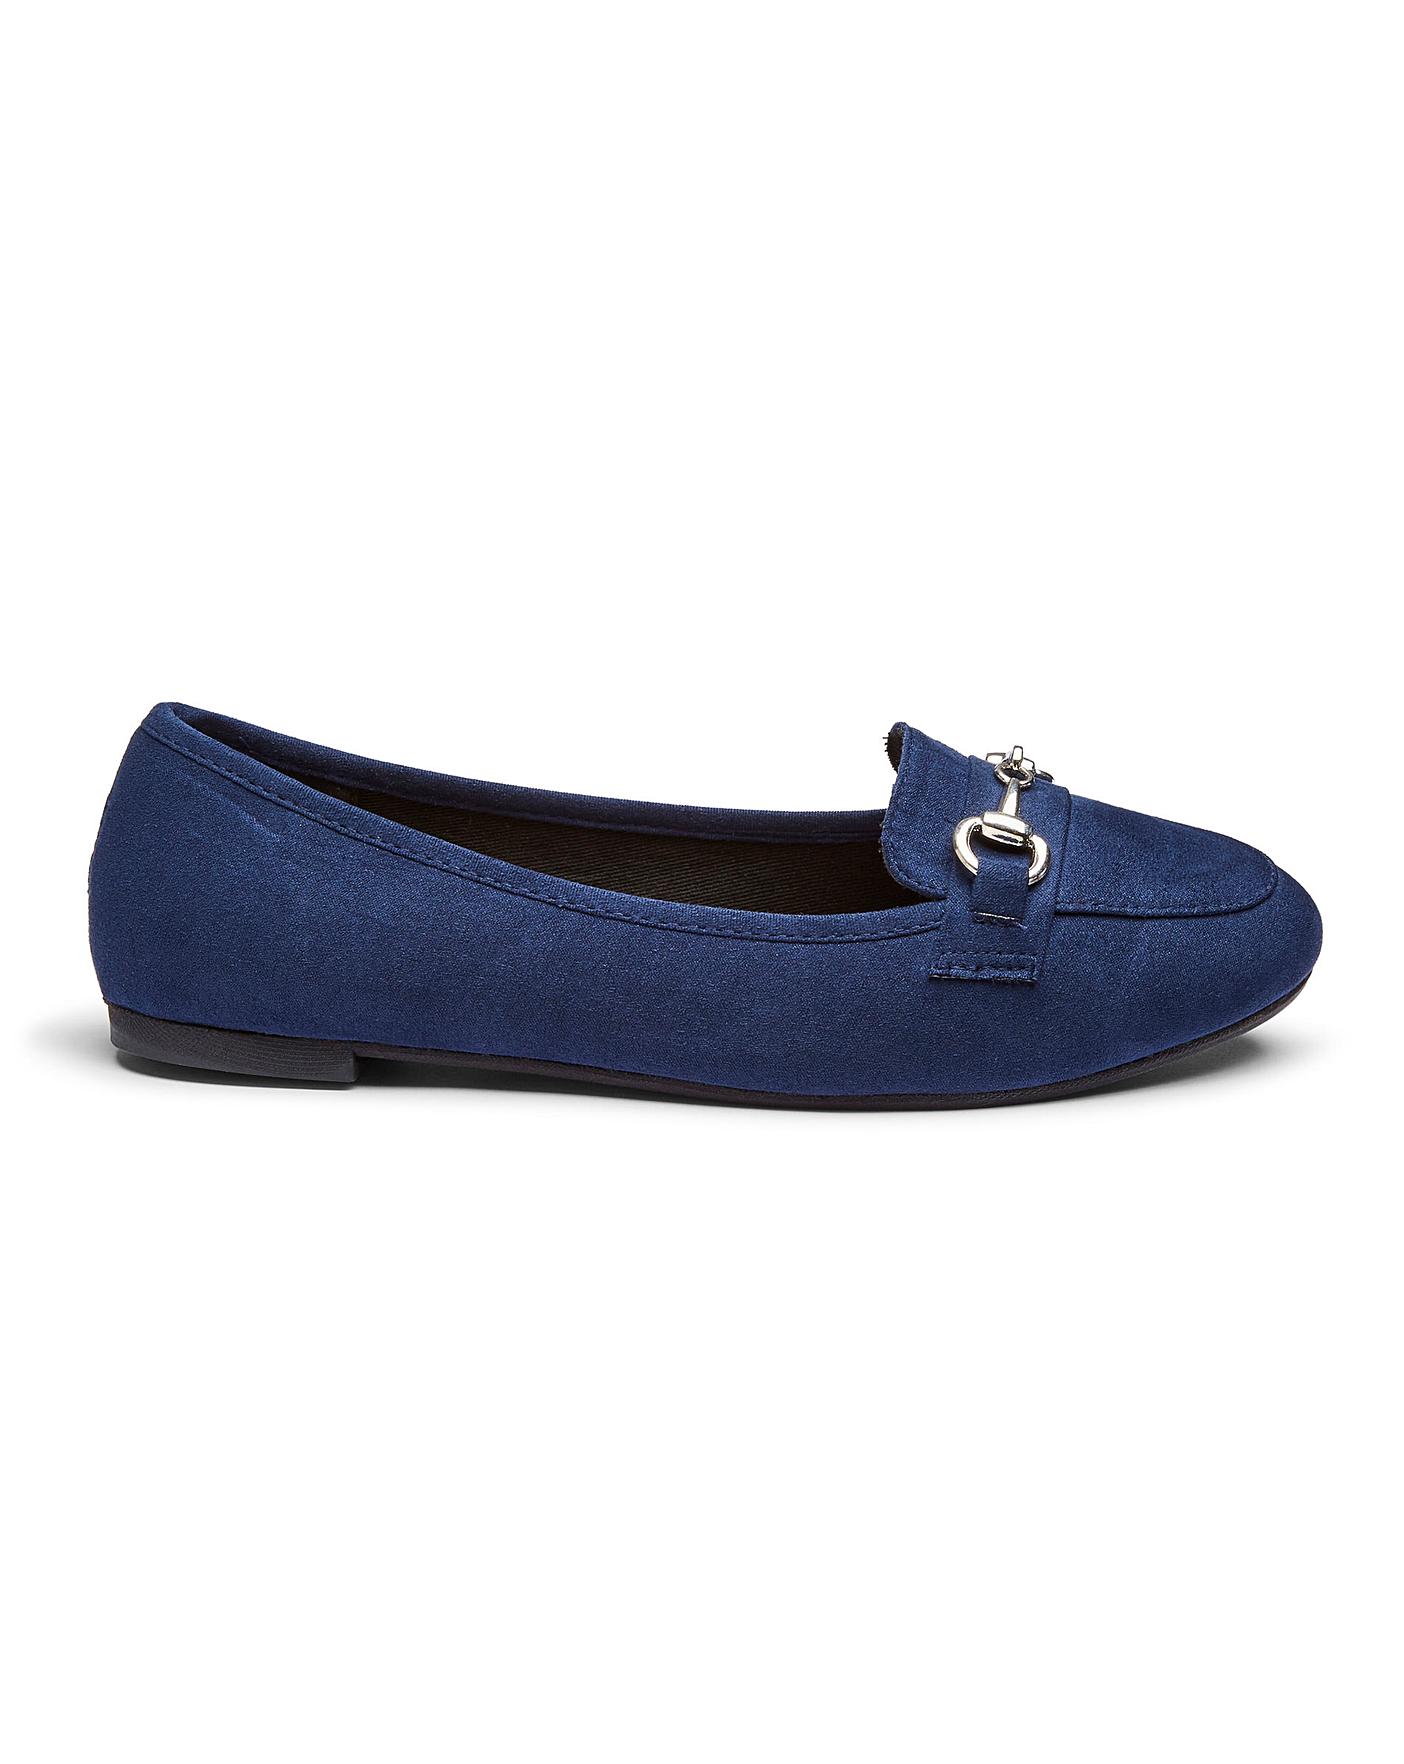 Gianna Loafer Extra Wide Fit | Marisota